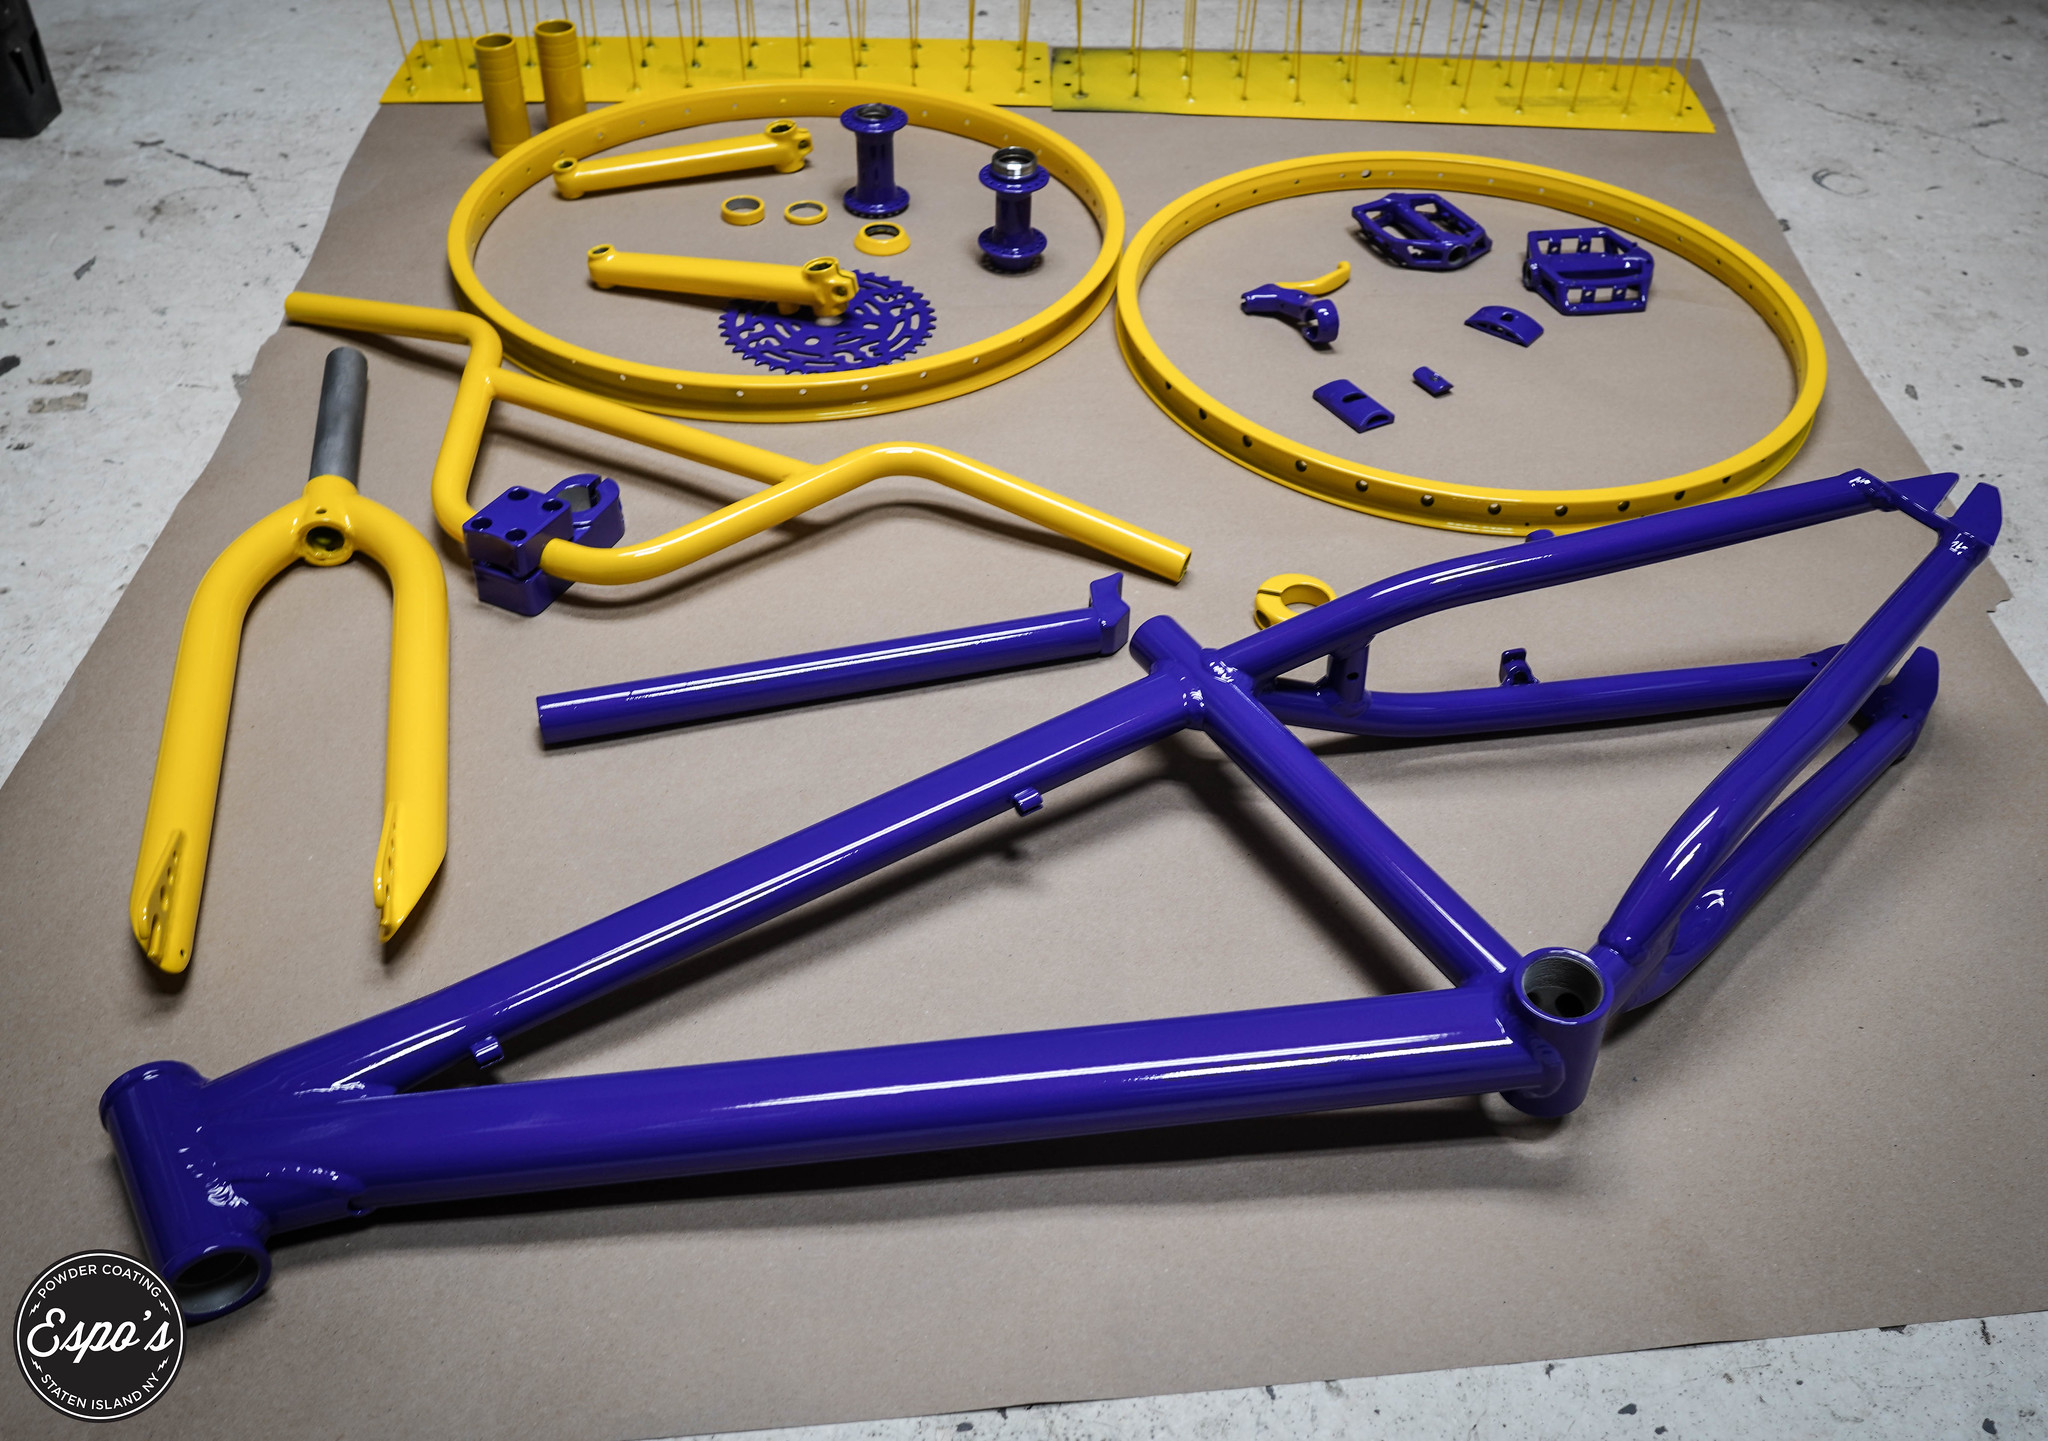 Powder Coat Bicycle Frames: Durability Meets Style